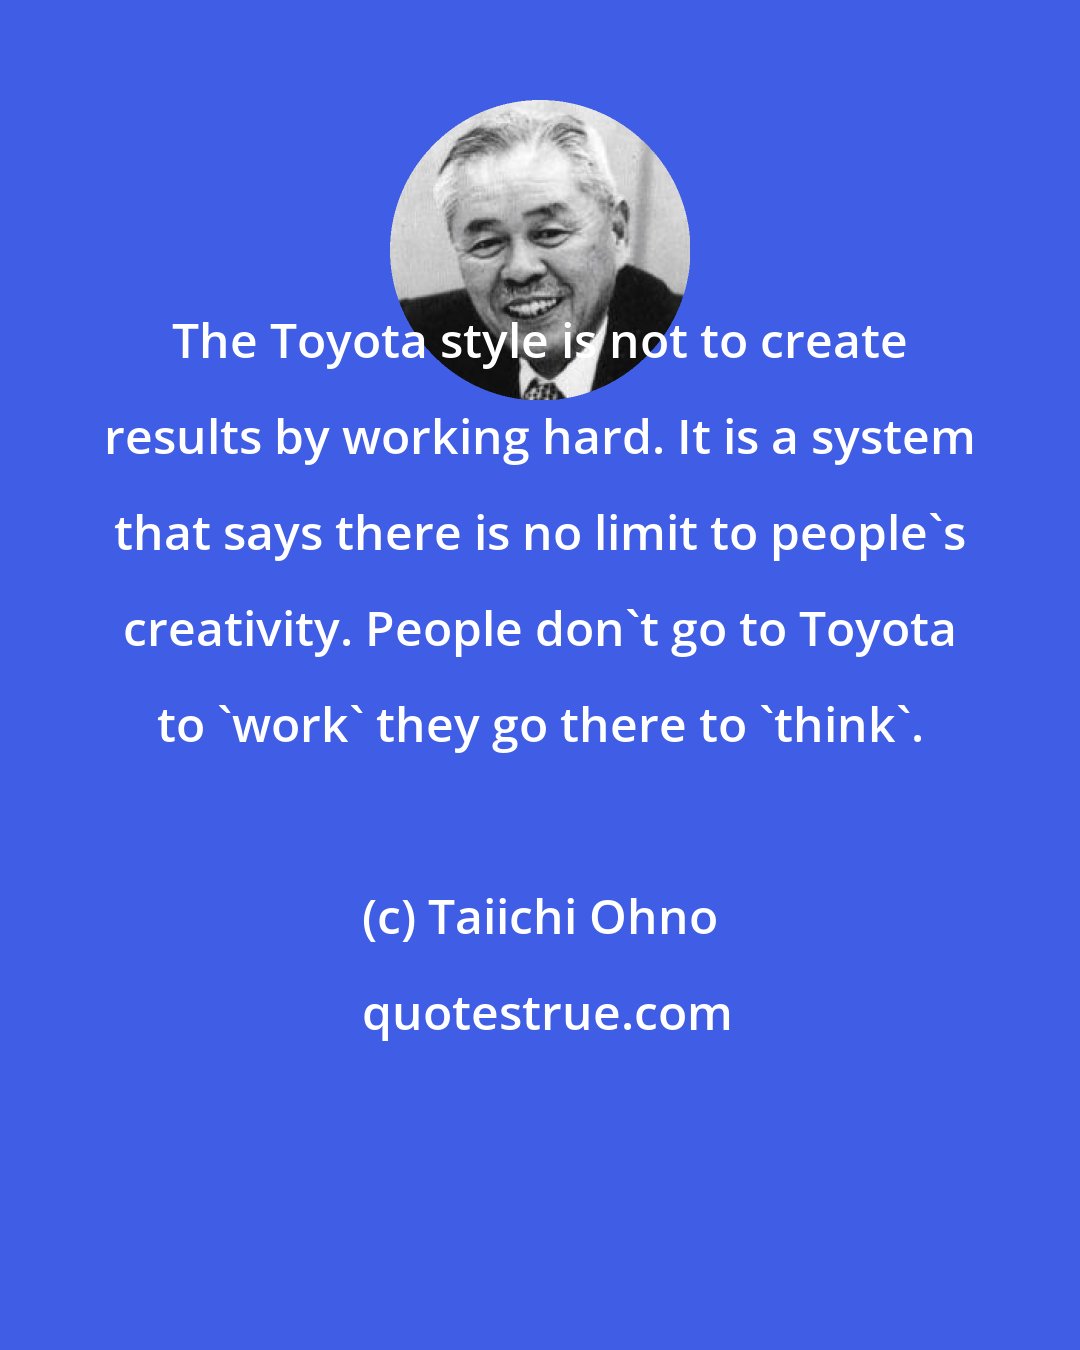 Taiichi Ohno: The Toyota style is not to create results by working hard. It is a system that says there is no limit to people's creativity. People don't go to Toyota to 'work' they go there to 'think'.